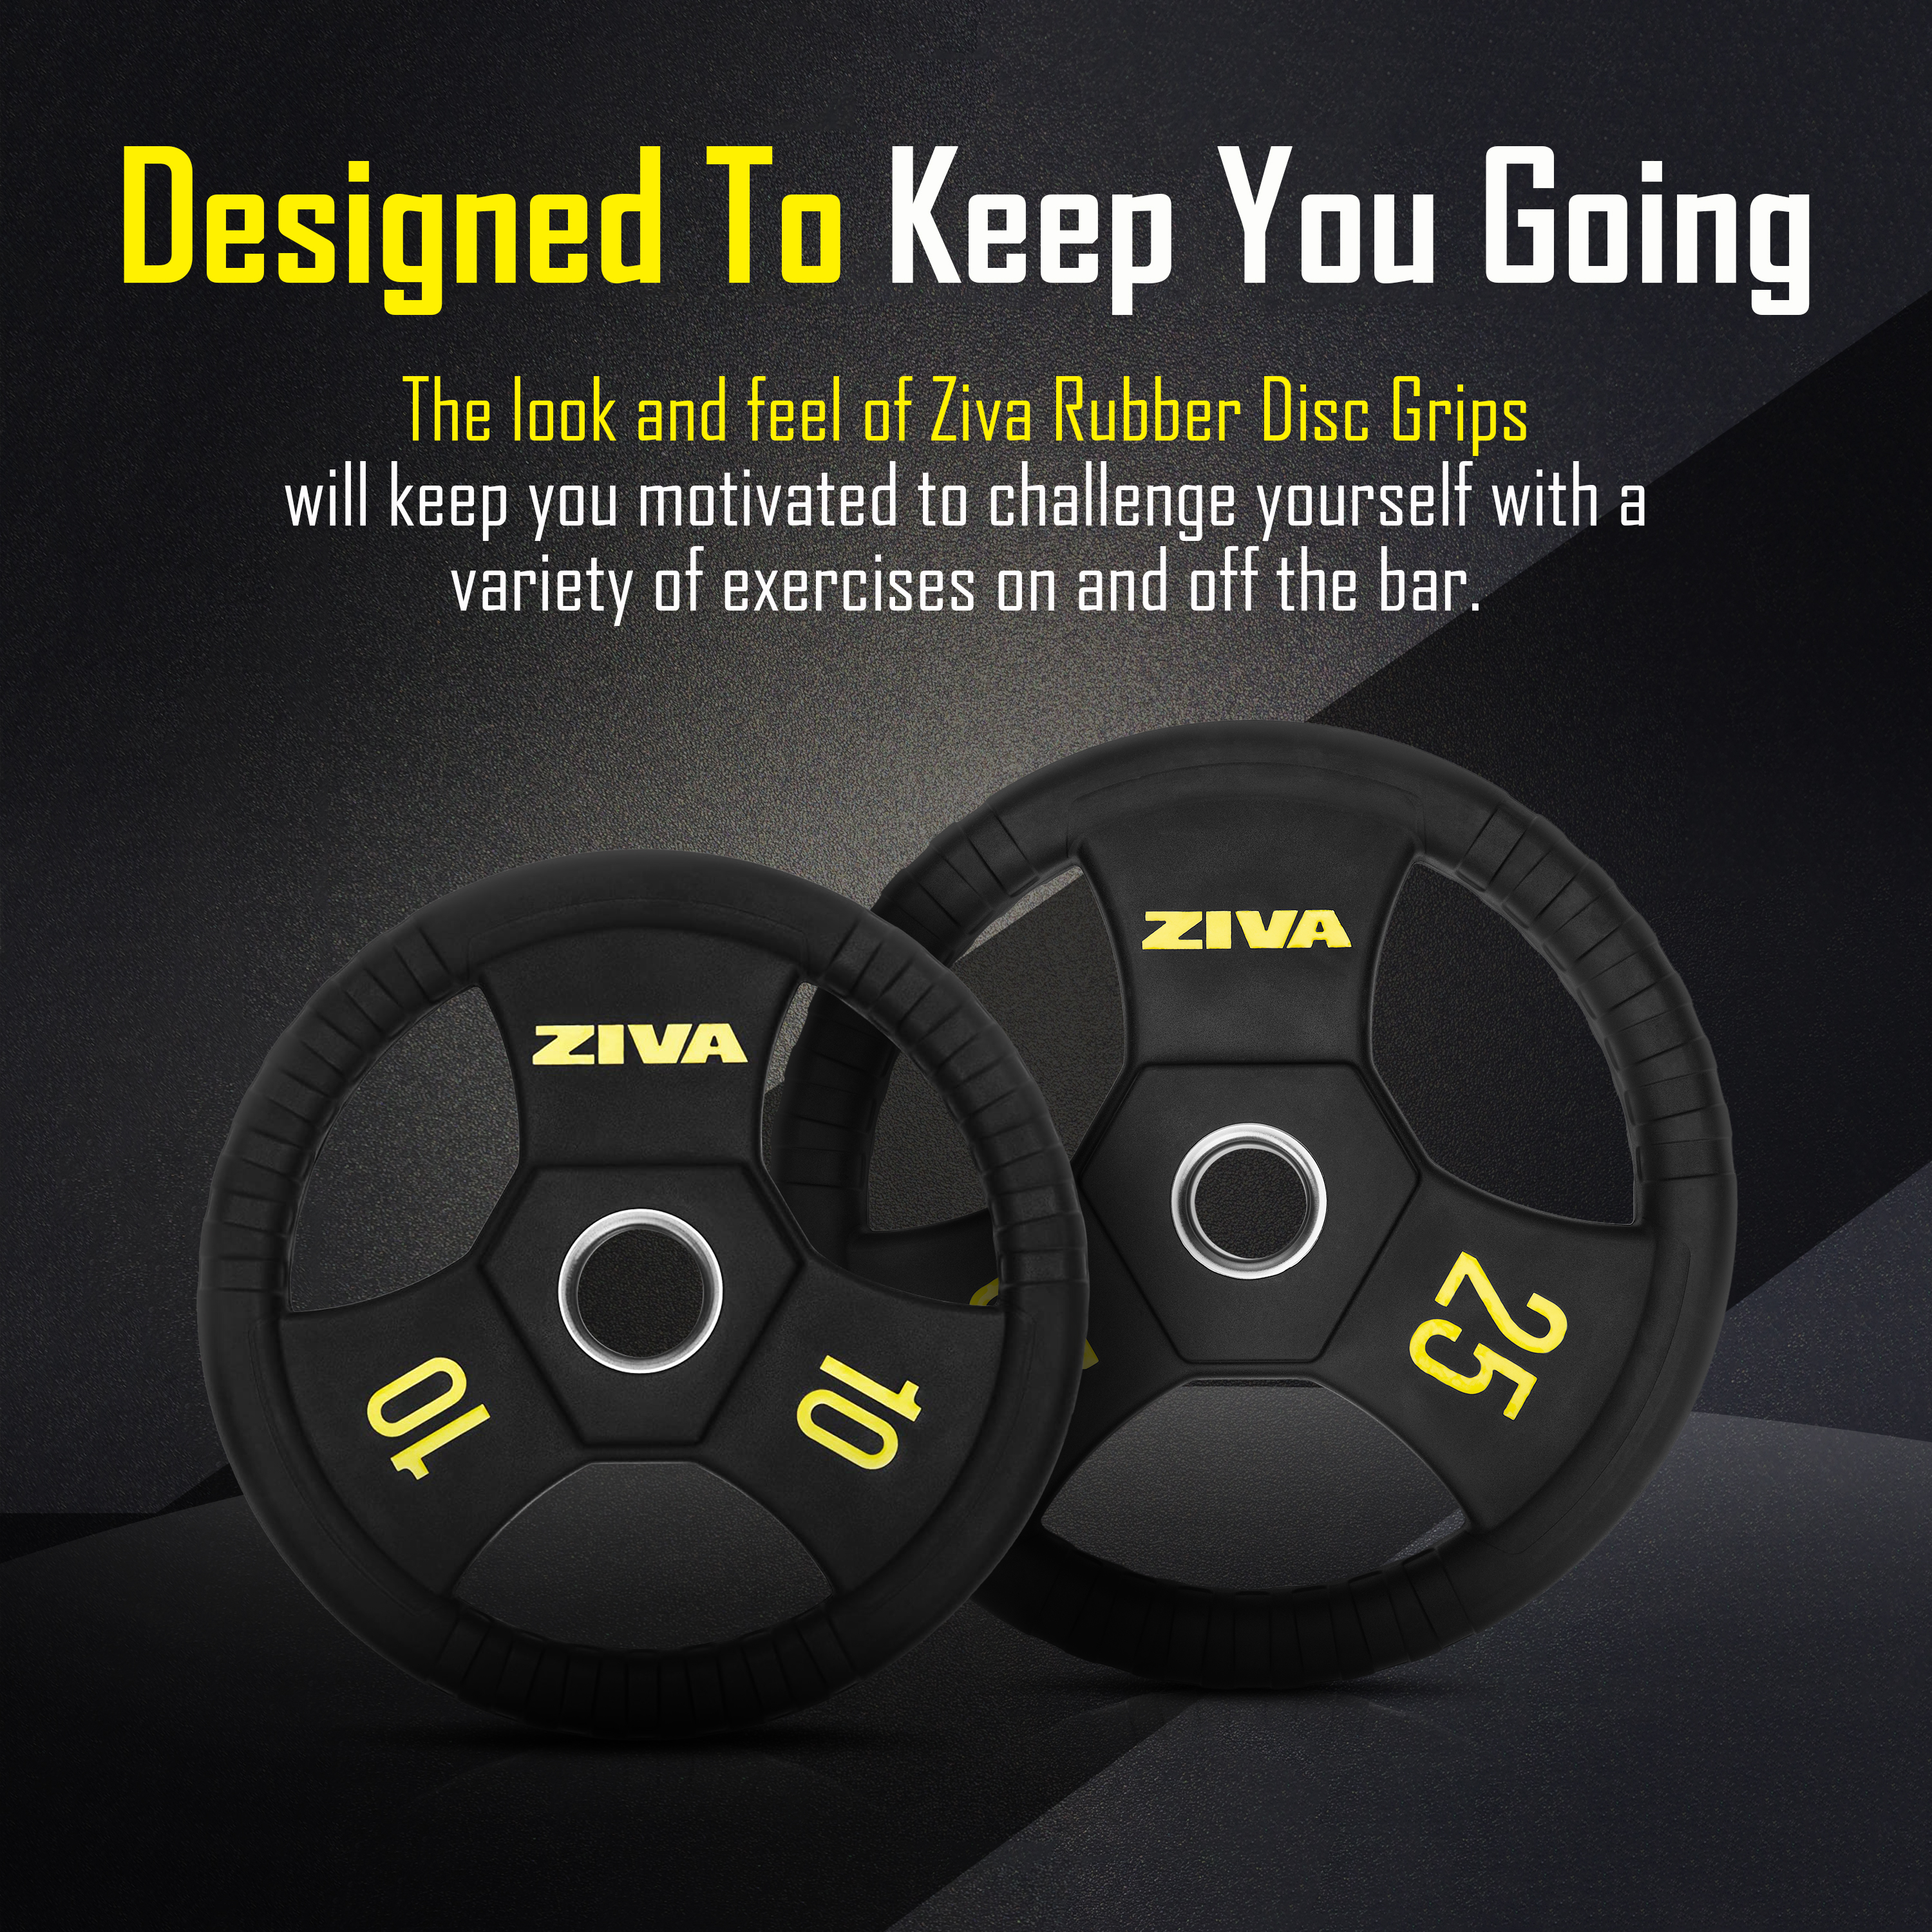 Designed to keep you going. The look and feel of Ziva Rubber Disc Grips will keep you motivated to challenge yourself with a variety of exercises on and off the bar.